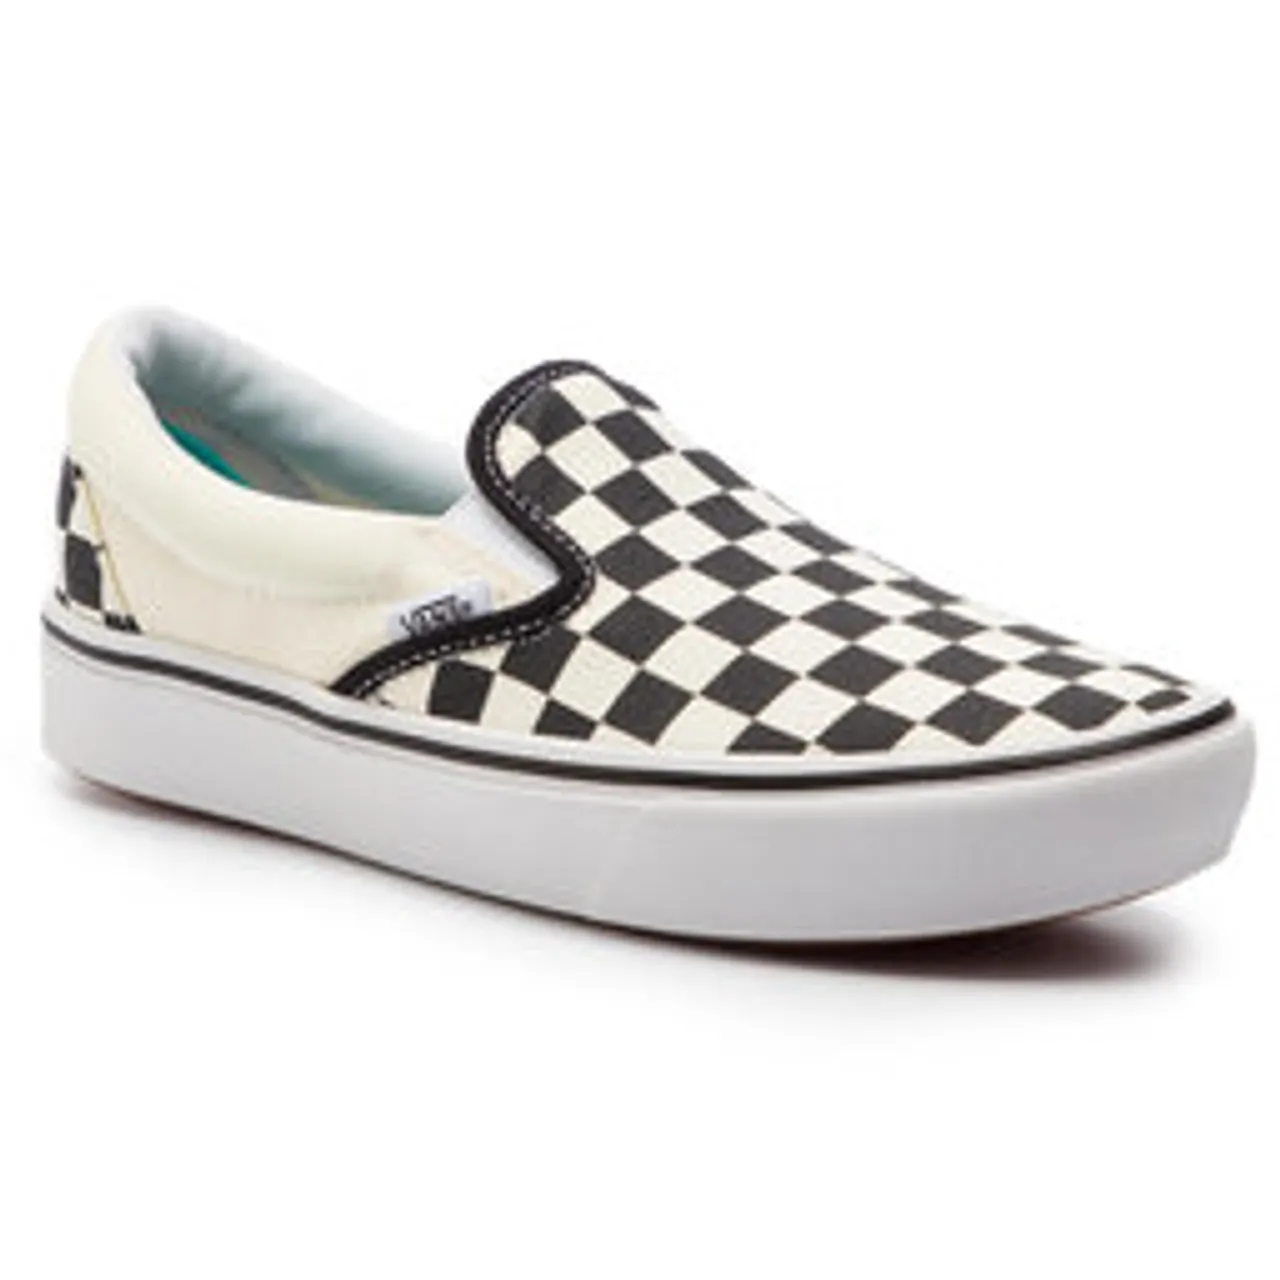 Sneakers aus Stoff Vans Comfycush Slip-On VN0A3WMDVO41 (Classic) Checkerboard/Tr